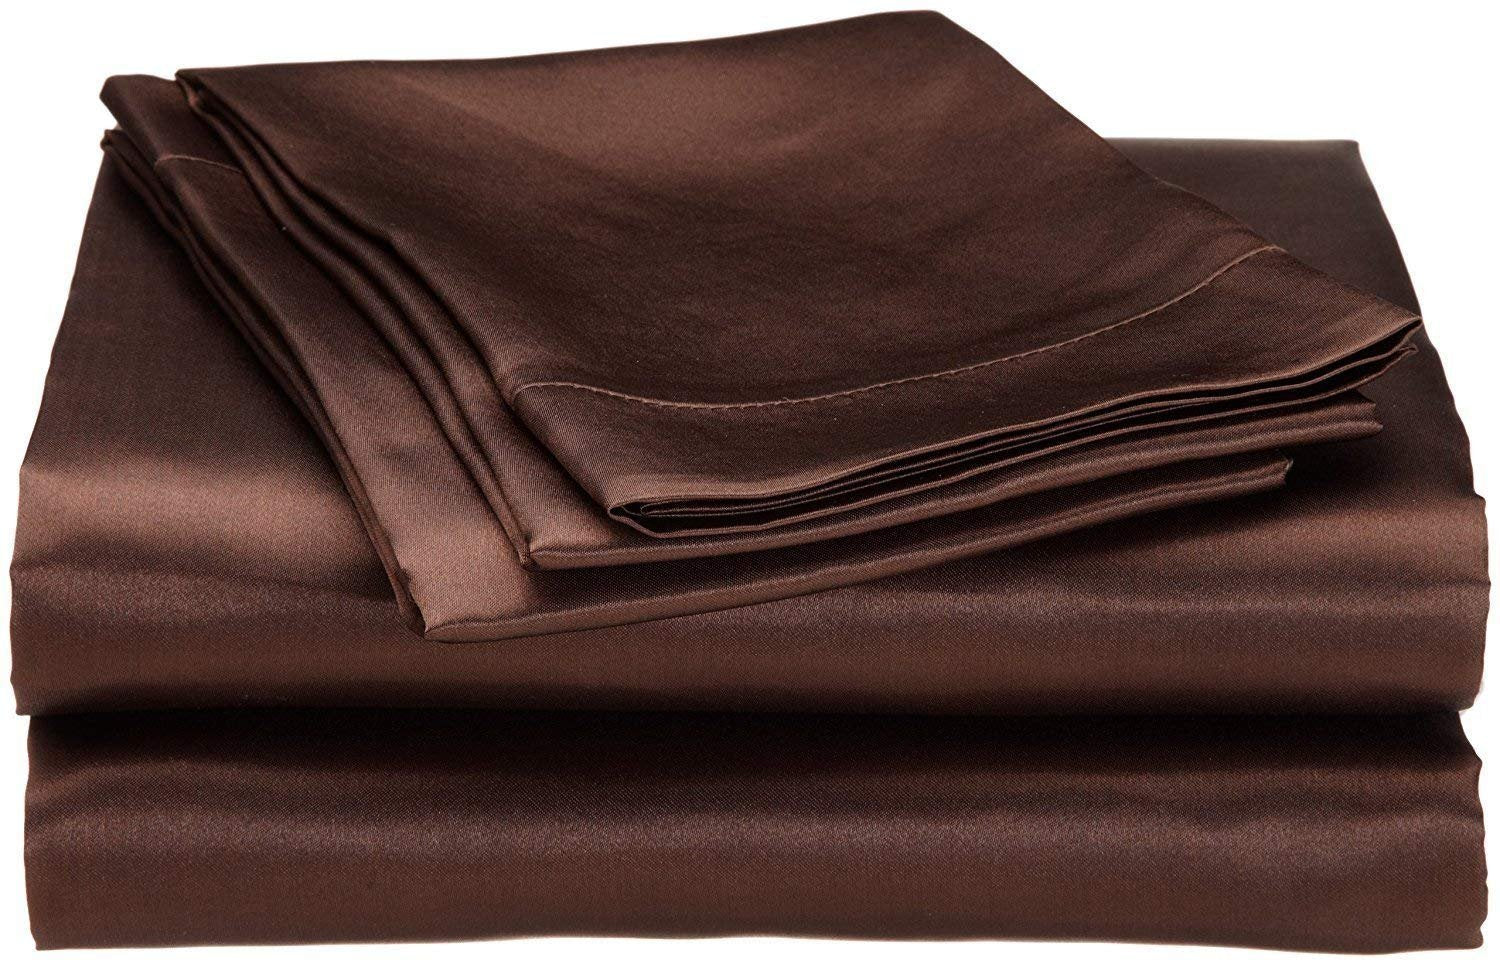 15 Inch Pocket Sheet Set Mulberry Sateen Silk Chocolate at-www.egyptianhomelinens.com